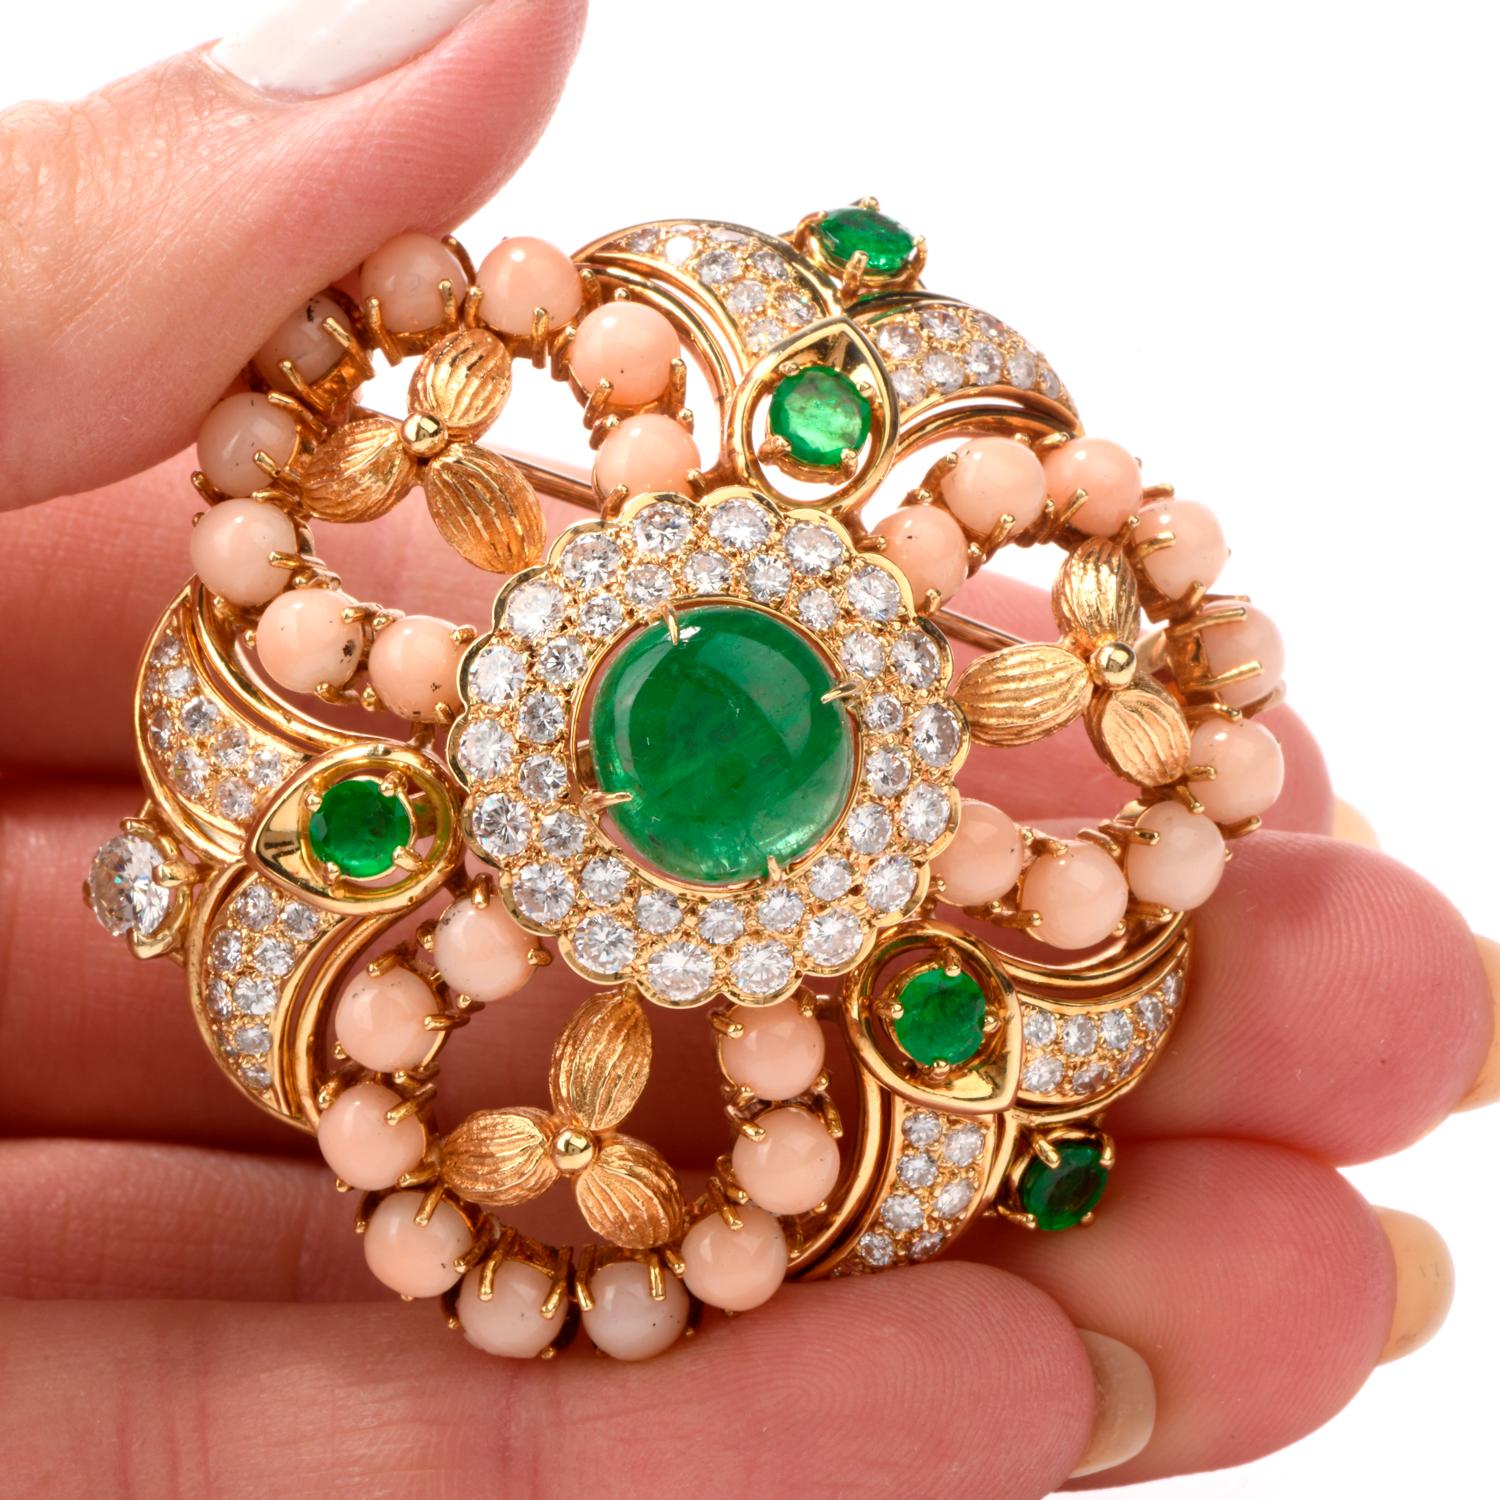  This Stylish coral Emerald and diamond Pin brooch is hand crafted in 18k yellow gold.

 Centered with a genuine cabochon emerald weighing approx. 3.20 carats,

surrounded by exquisite diamonds and natural angel skin corals and 4 round cut emerald.